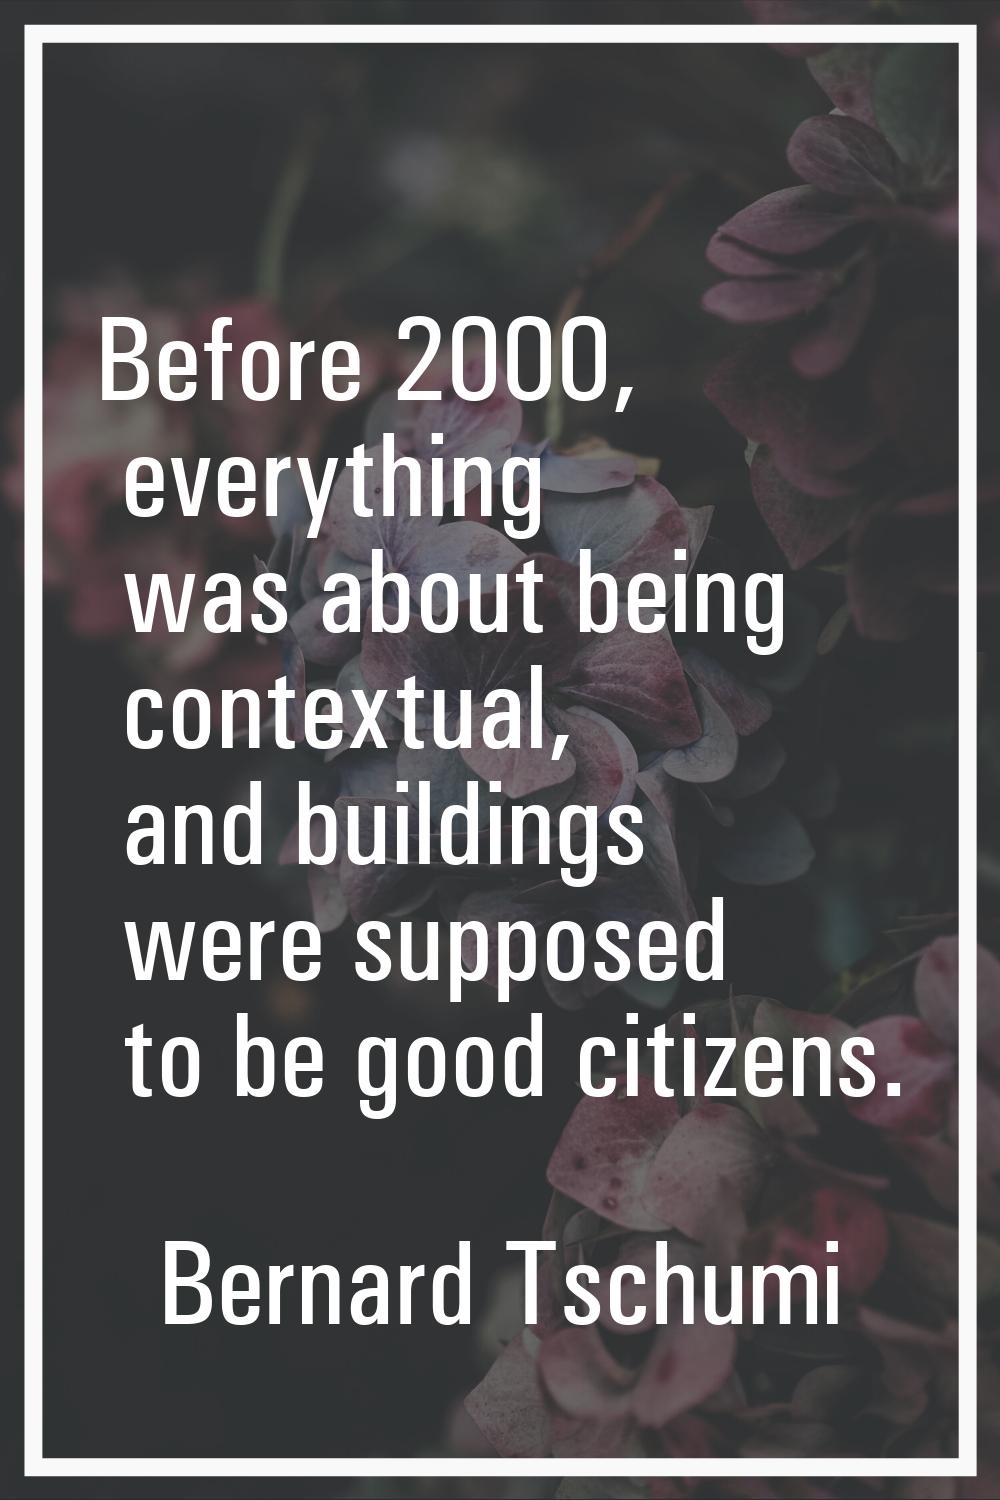 Before 2000, everything was about being contextual, and buildings were supposed to be good citizens